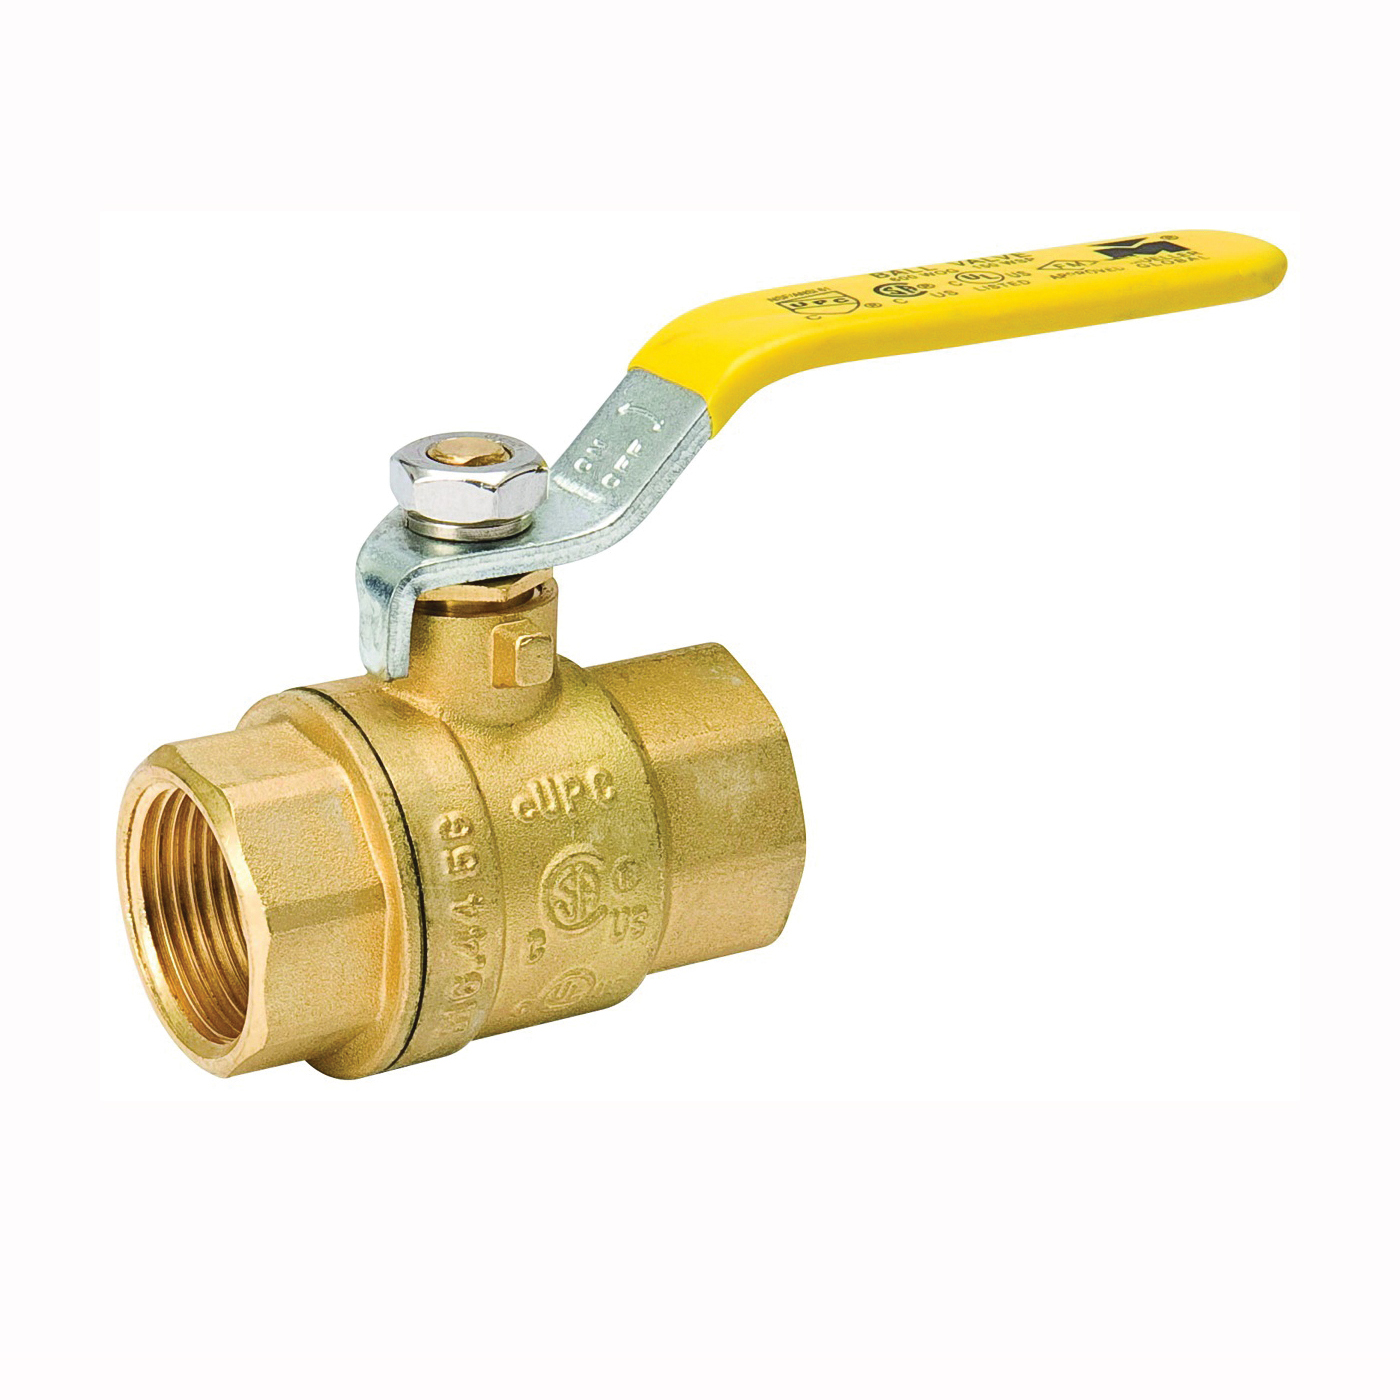 107-821NL Ball Valve, 1/4 in Connection, FPT x FPT, 600/150 psi Pressure, Manual Actuator, Brass Body